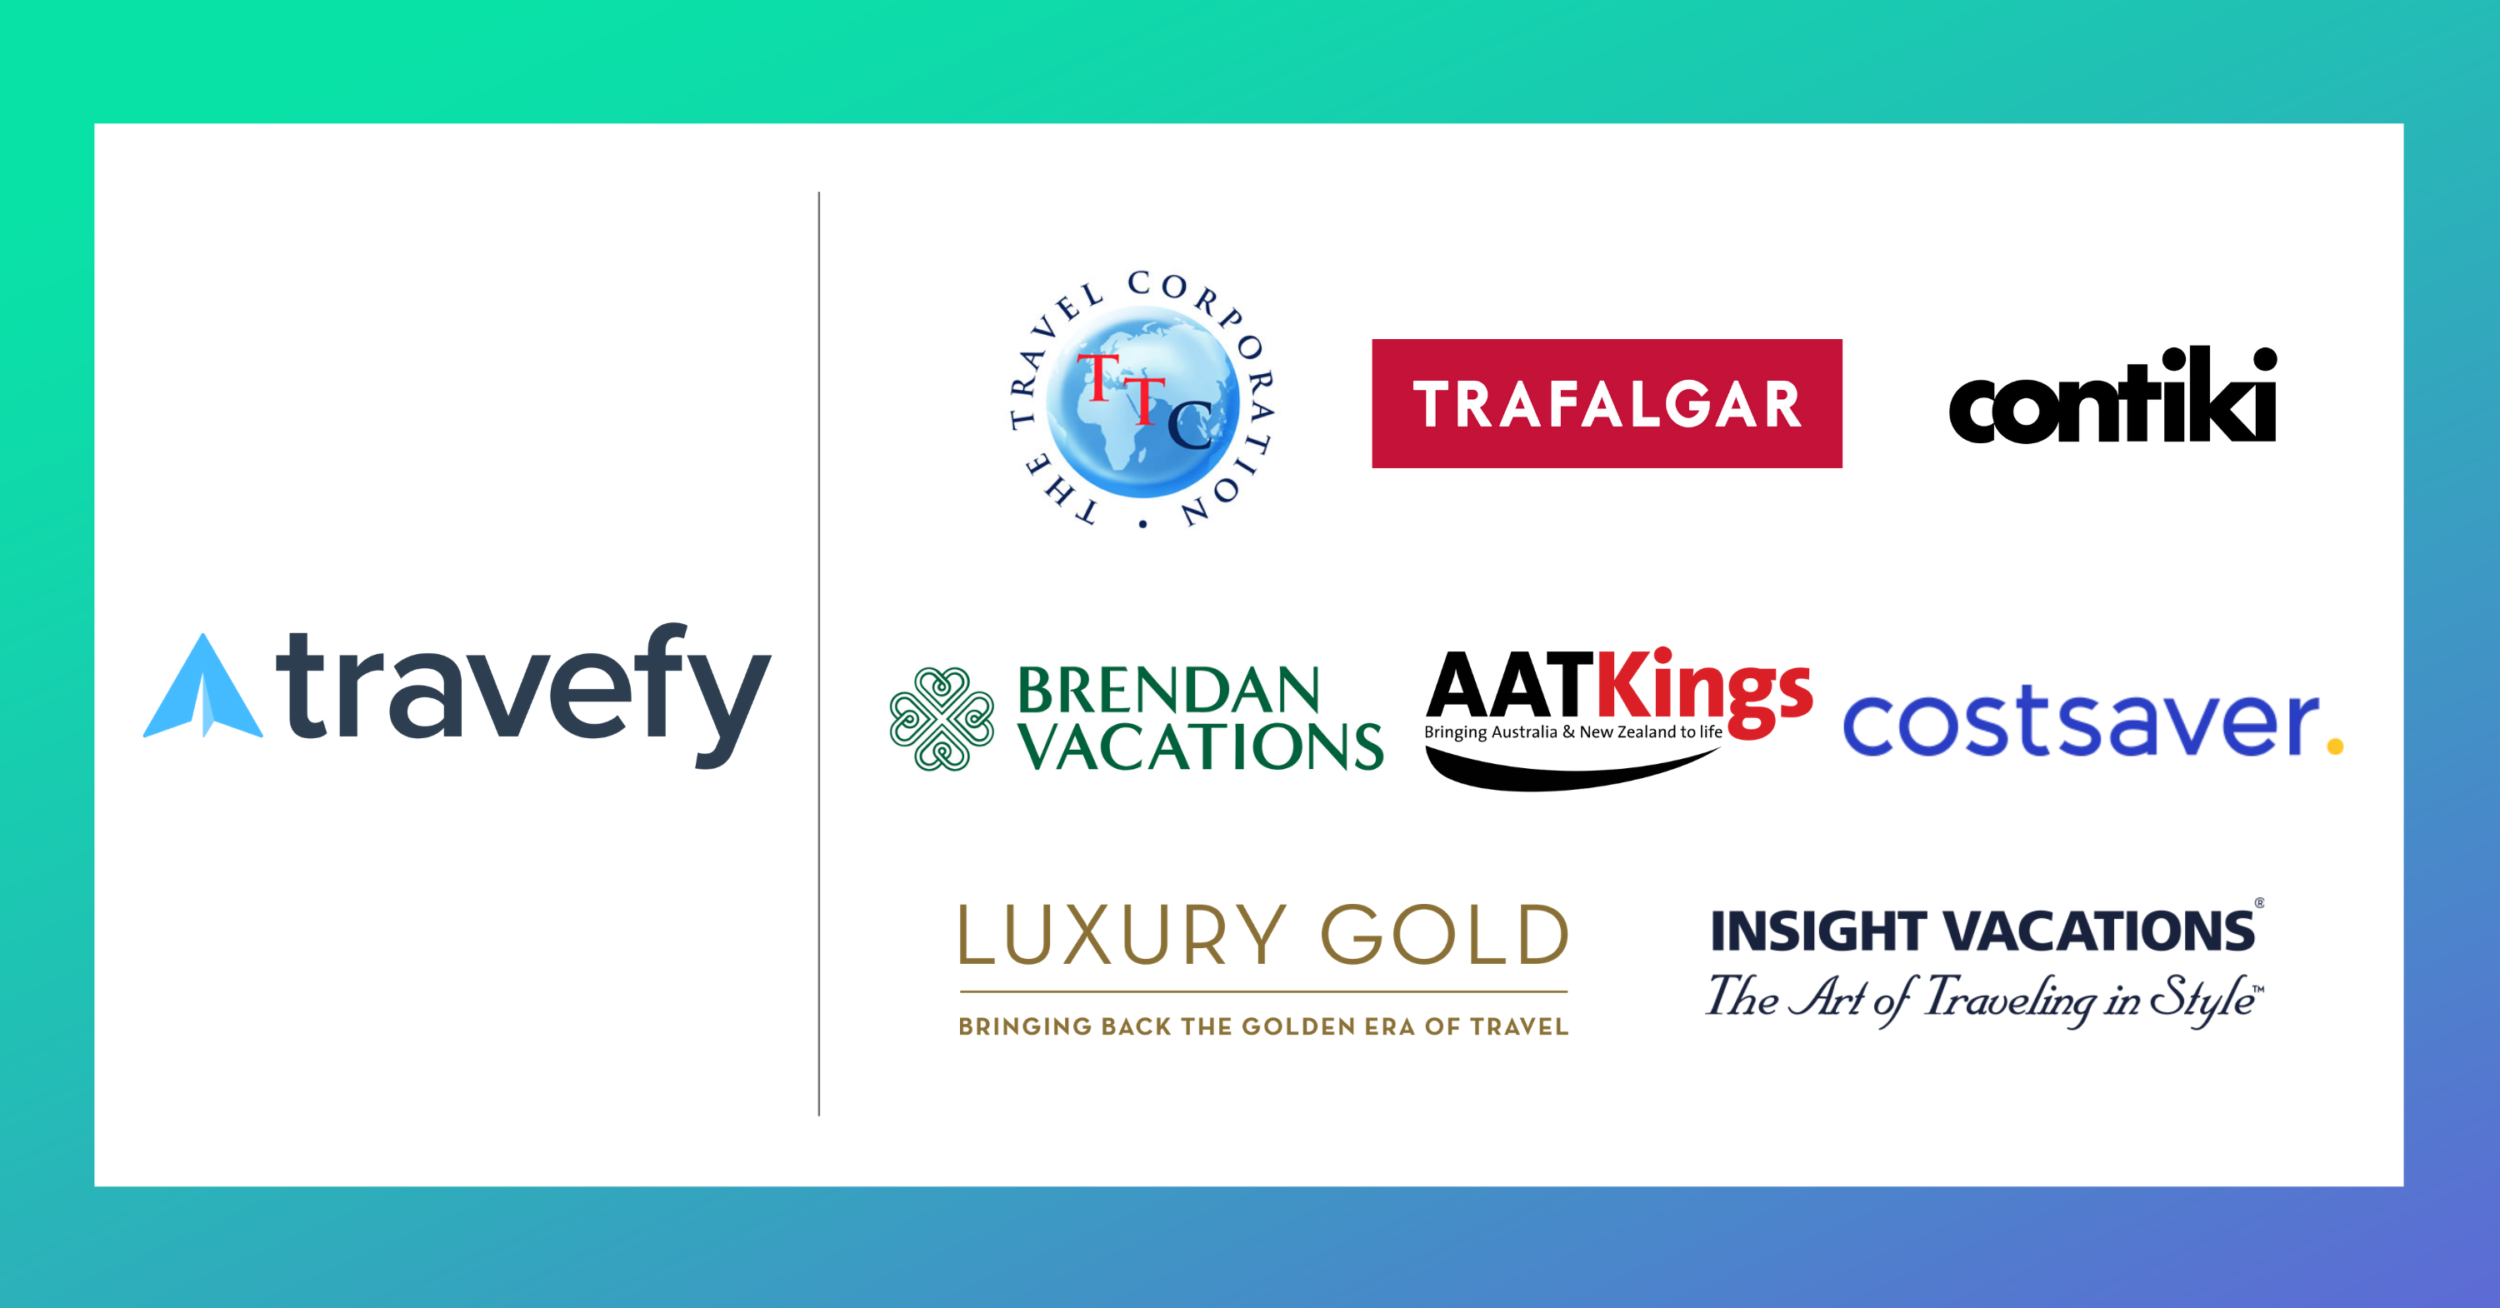 the travel corporation brands